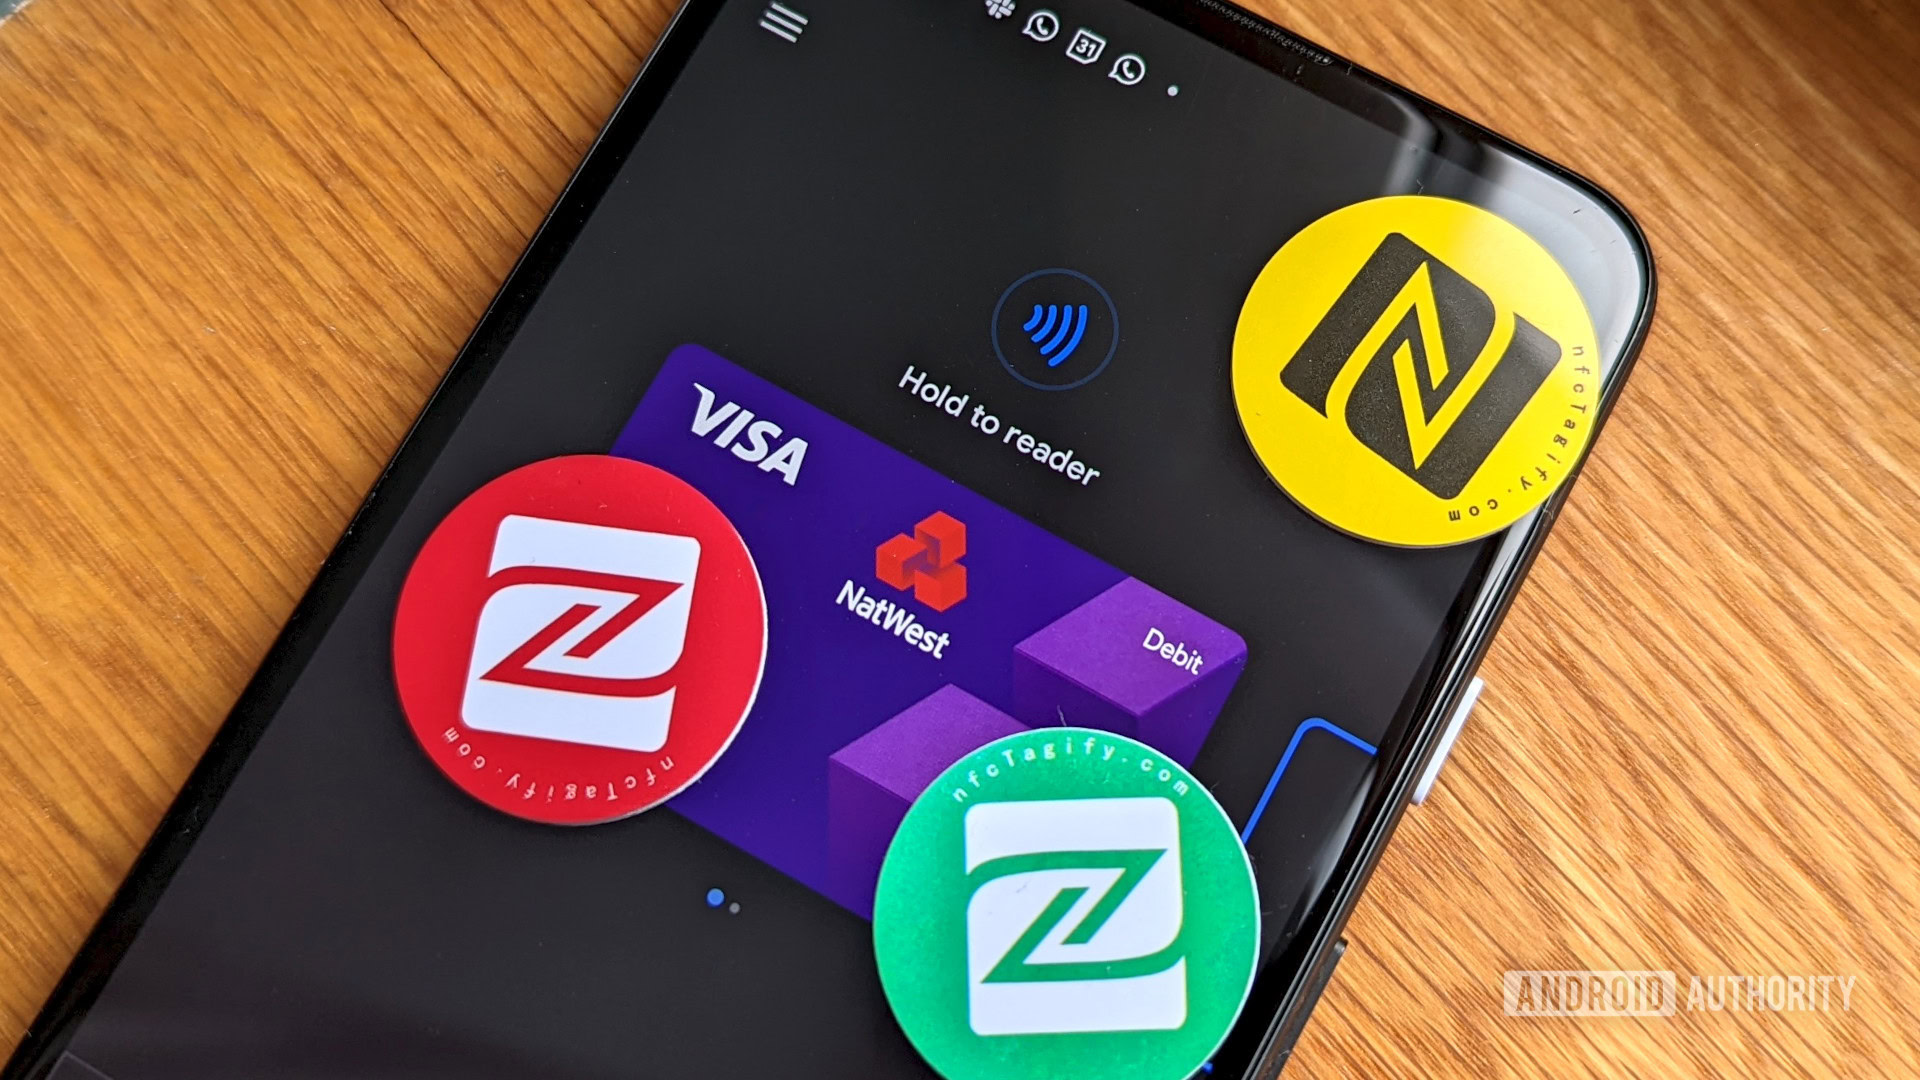 Working with NFC tags on Android